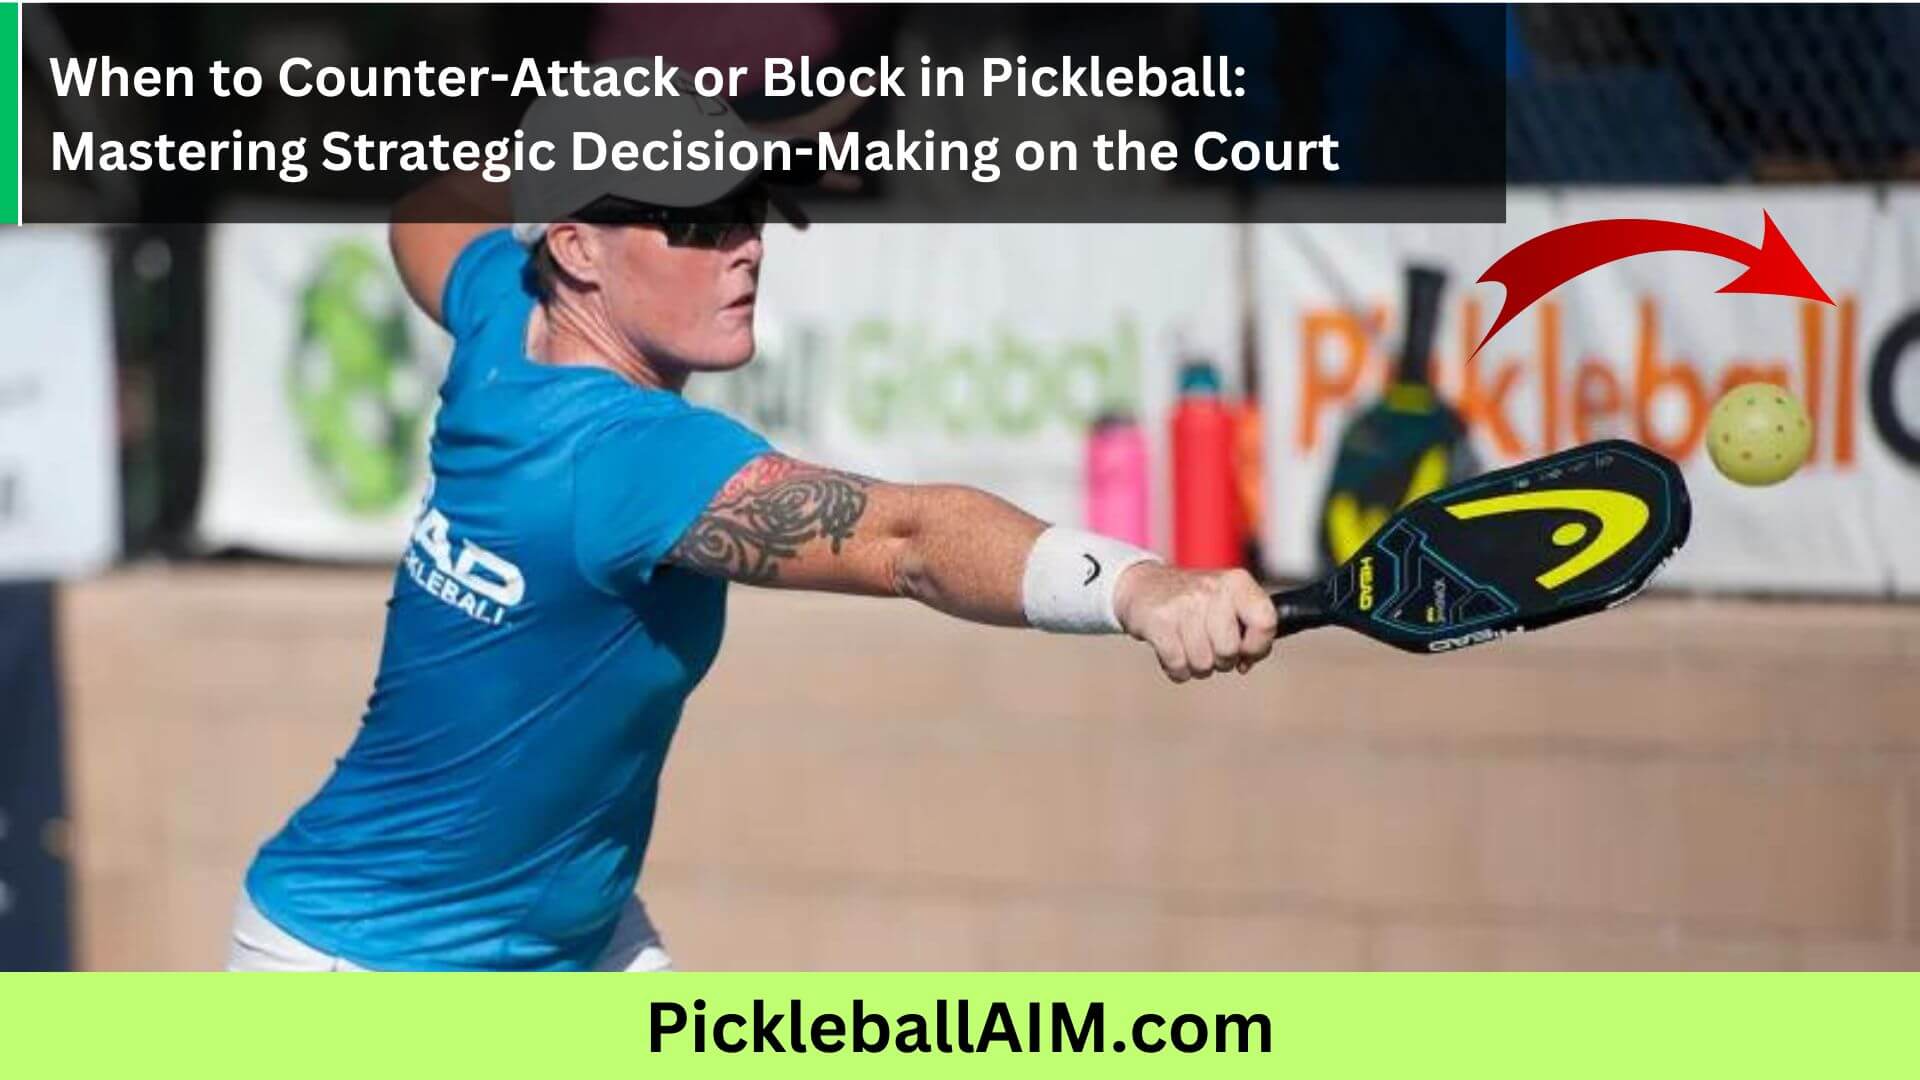 Strategic Decision-Making in Pickleball When to Counter-Attack or Block for Winning Plays